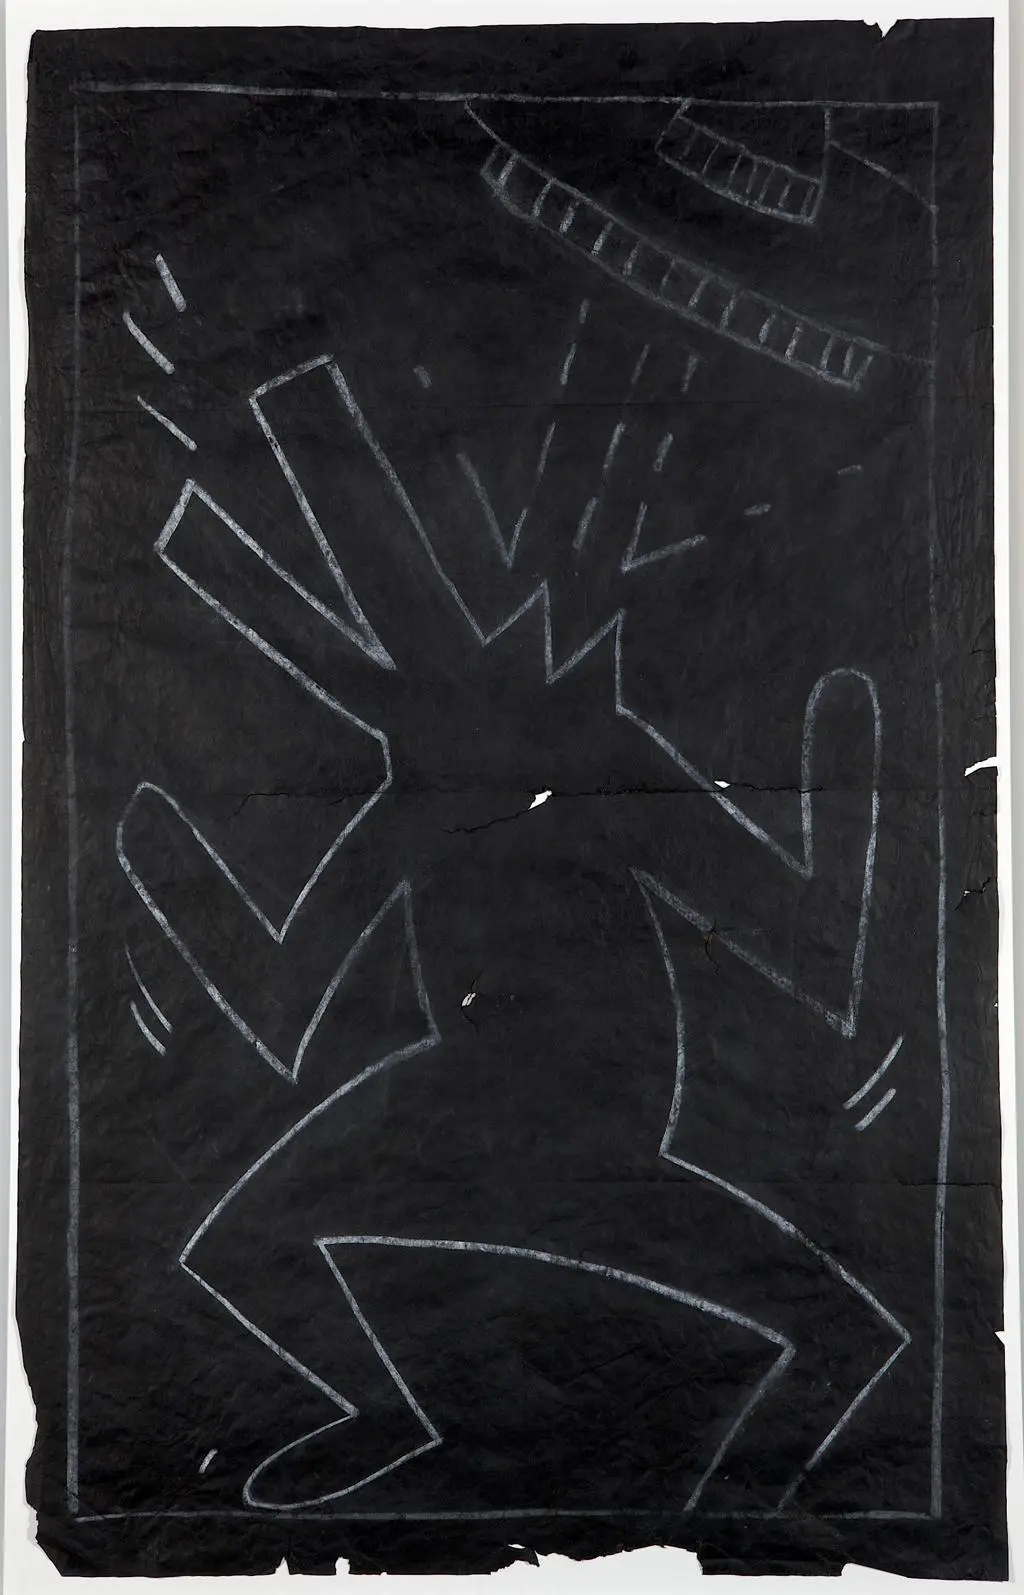 Untitled (UFO and dog), ca. 1980 - 1983 chalk on black paper, 48.75” x 32” Collection of Justin Warsh Keith Haring artwork © Keith Haring Foundation. Photo credit: Aaron Igler, Greenhouse Media.